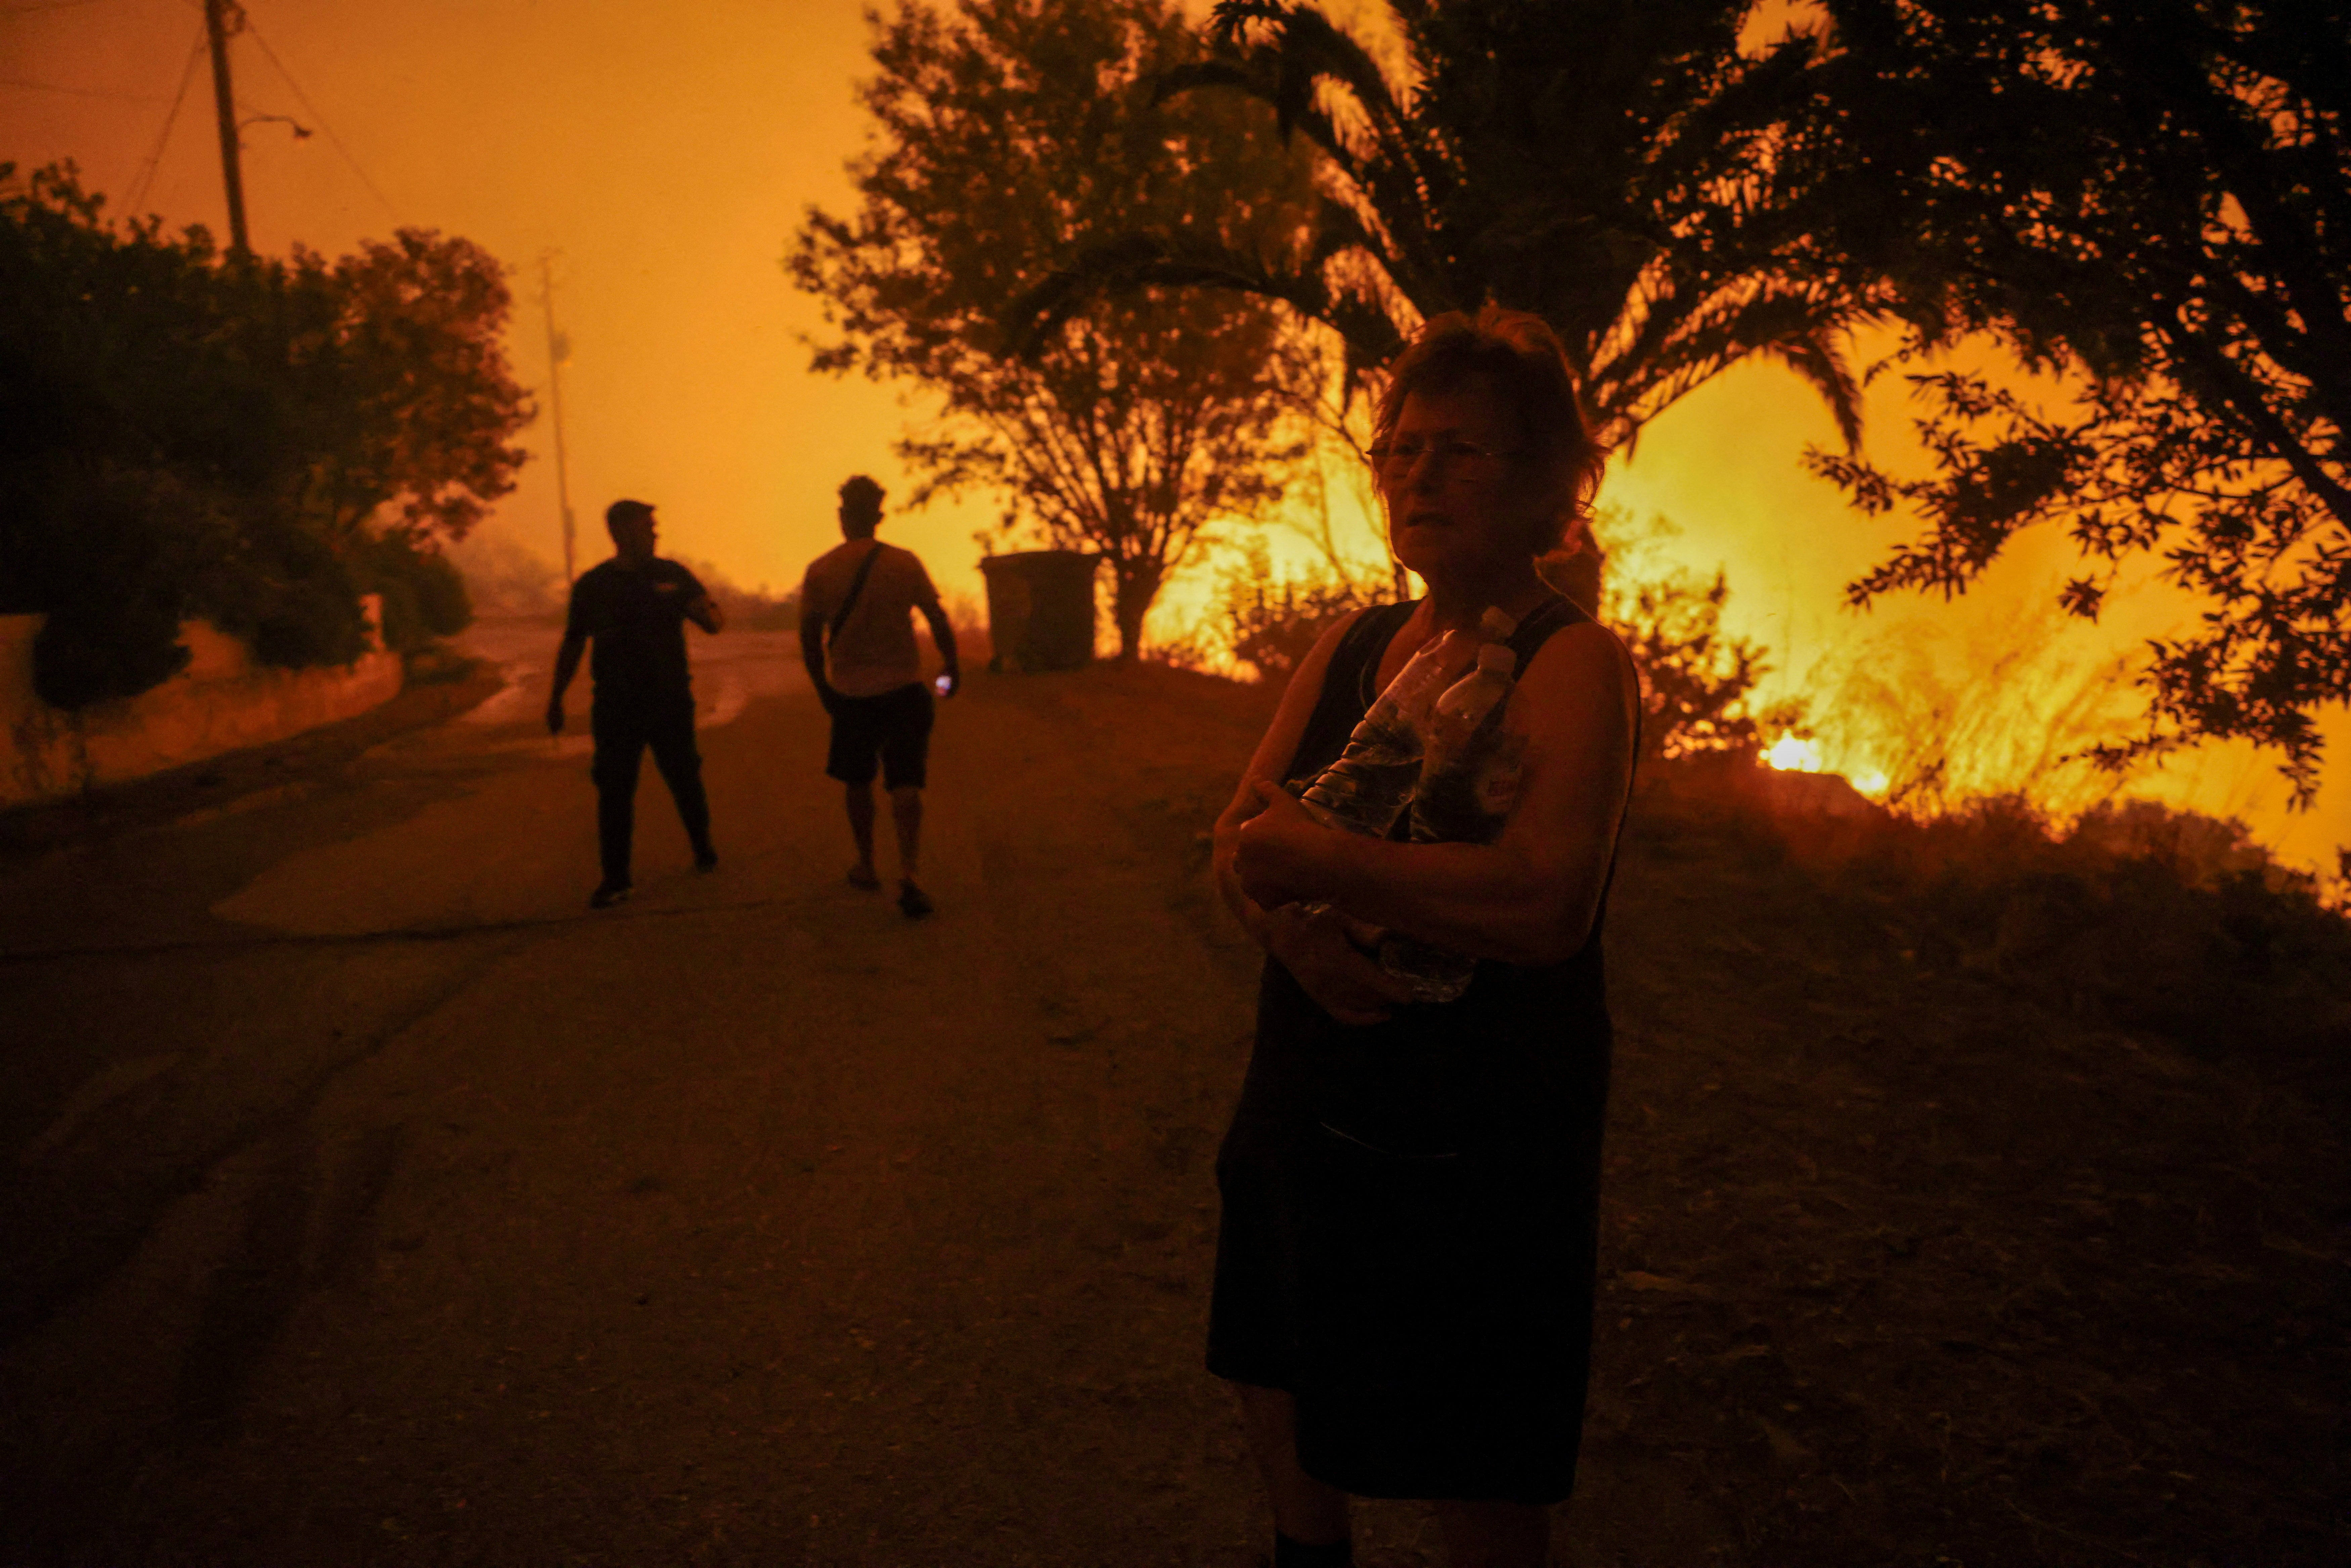 A local resident holds bottles of water next to a wildfire burning in the village of Latas, in southern Greece, on Saturday